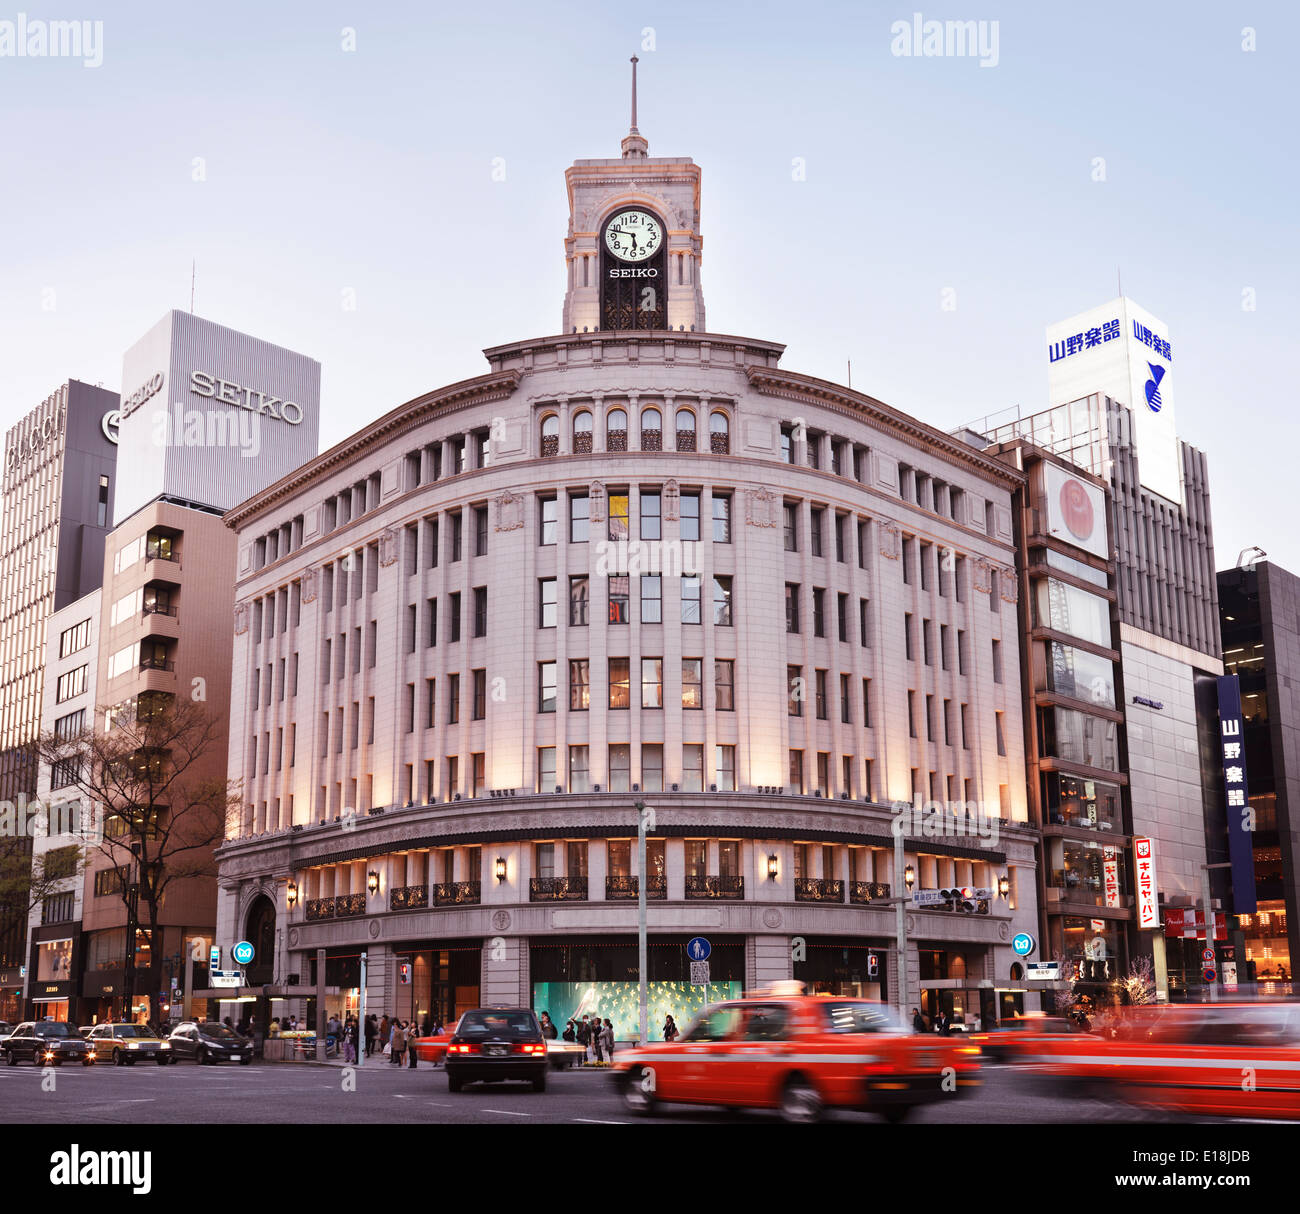 Wako Department Store building with Seiko clock in Ginza, Tokyo, Japan 2014  Stock Photo - Alamy